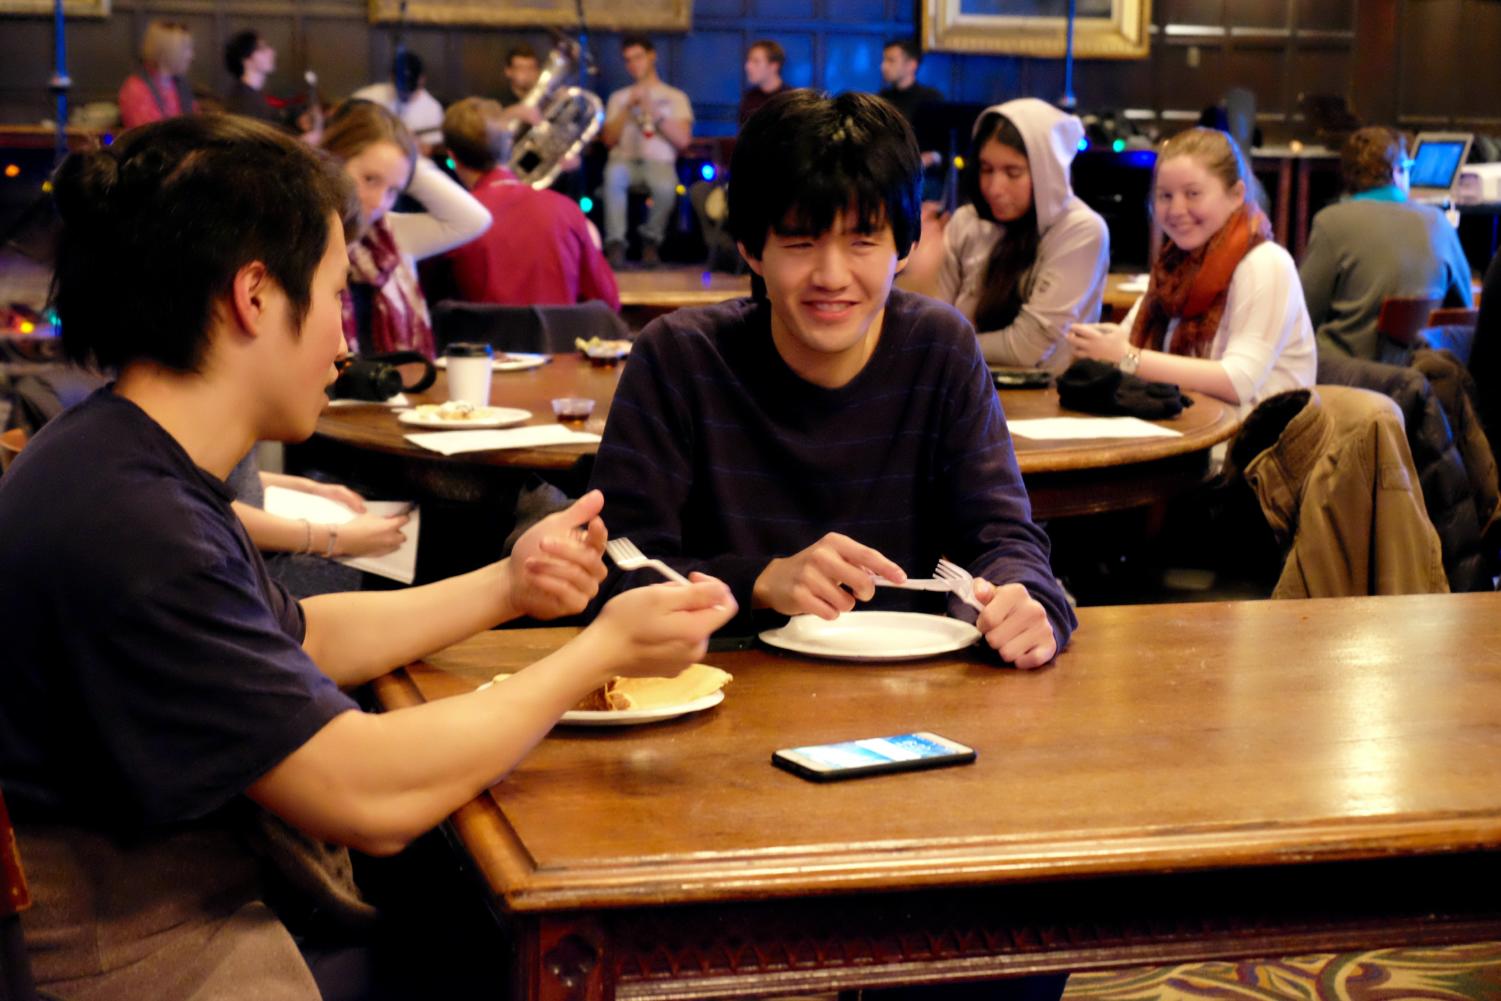 Students eat and chat in Hutchinson Commons.